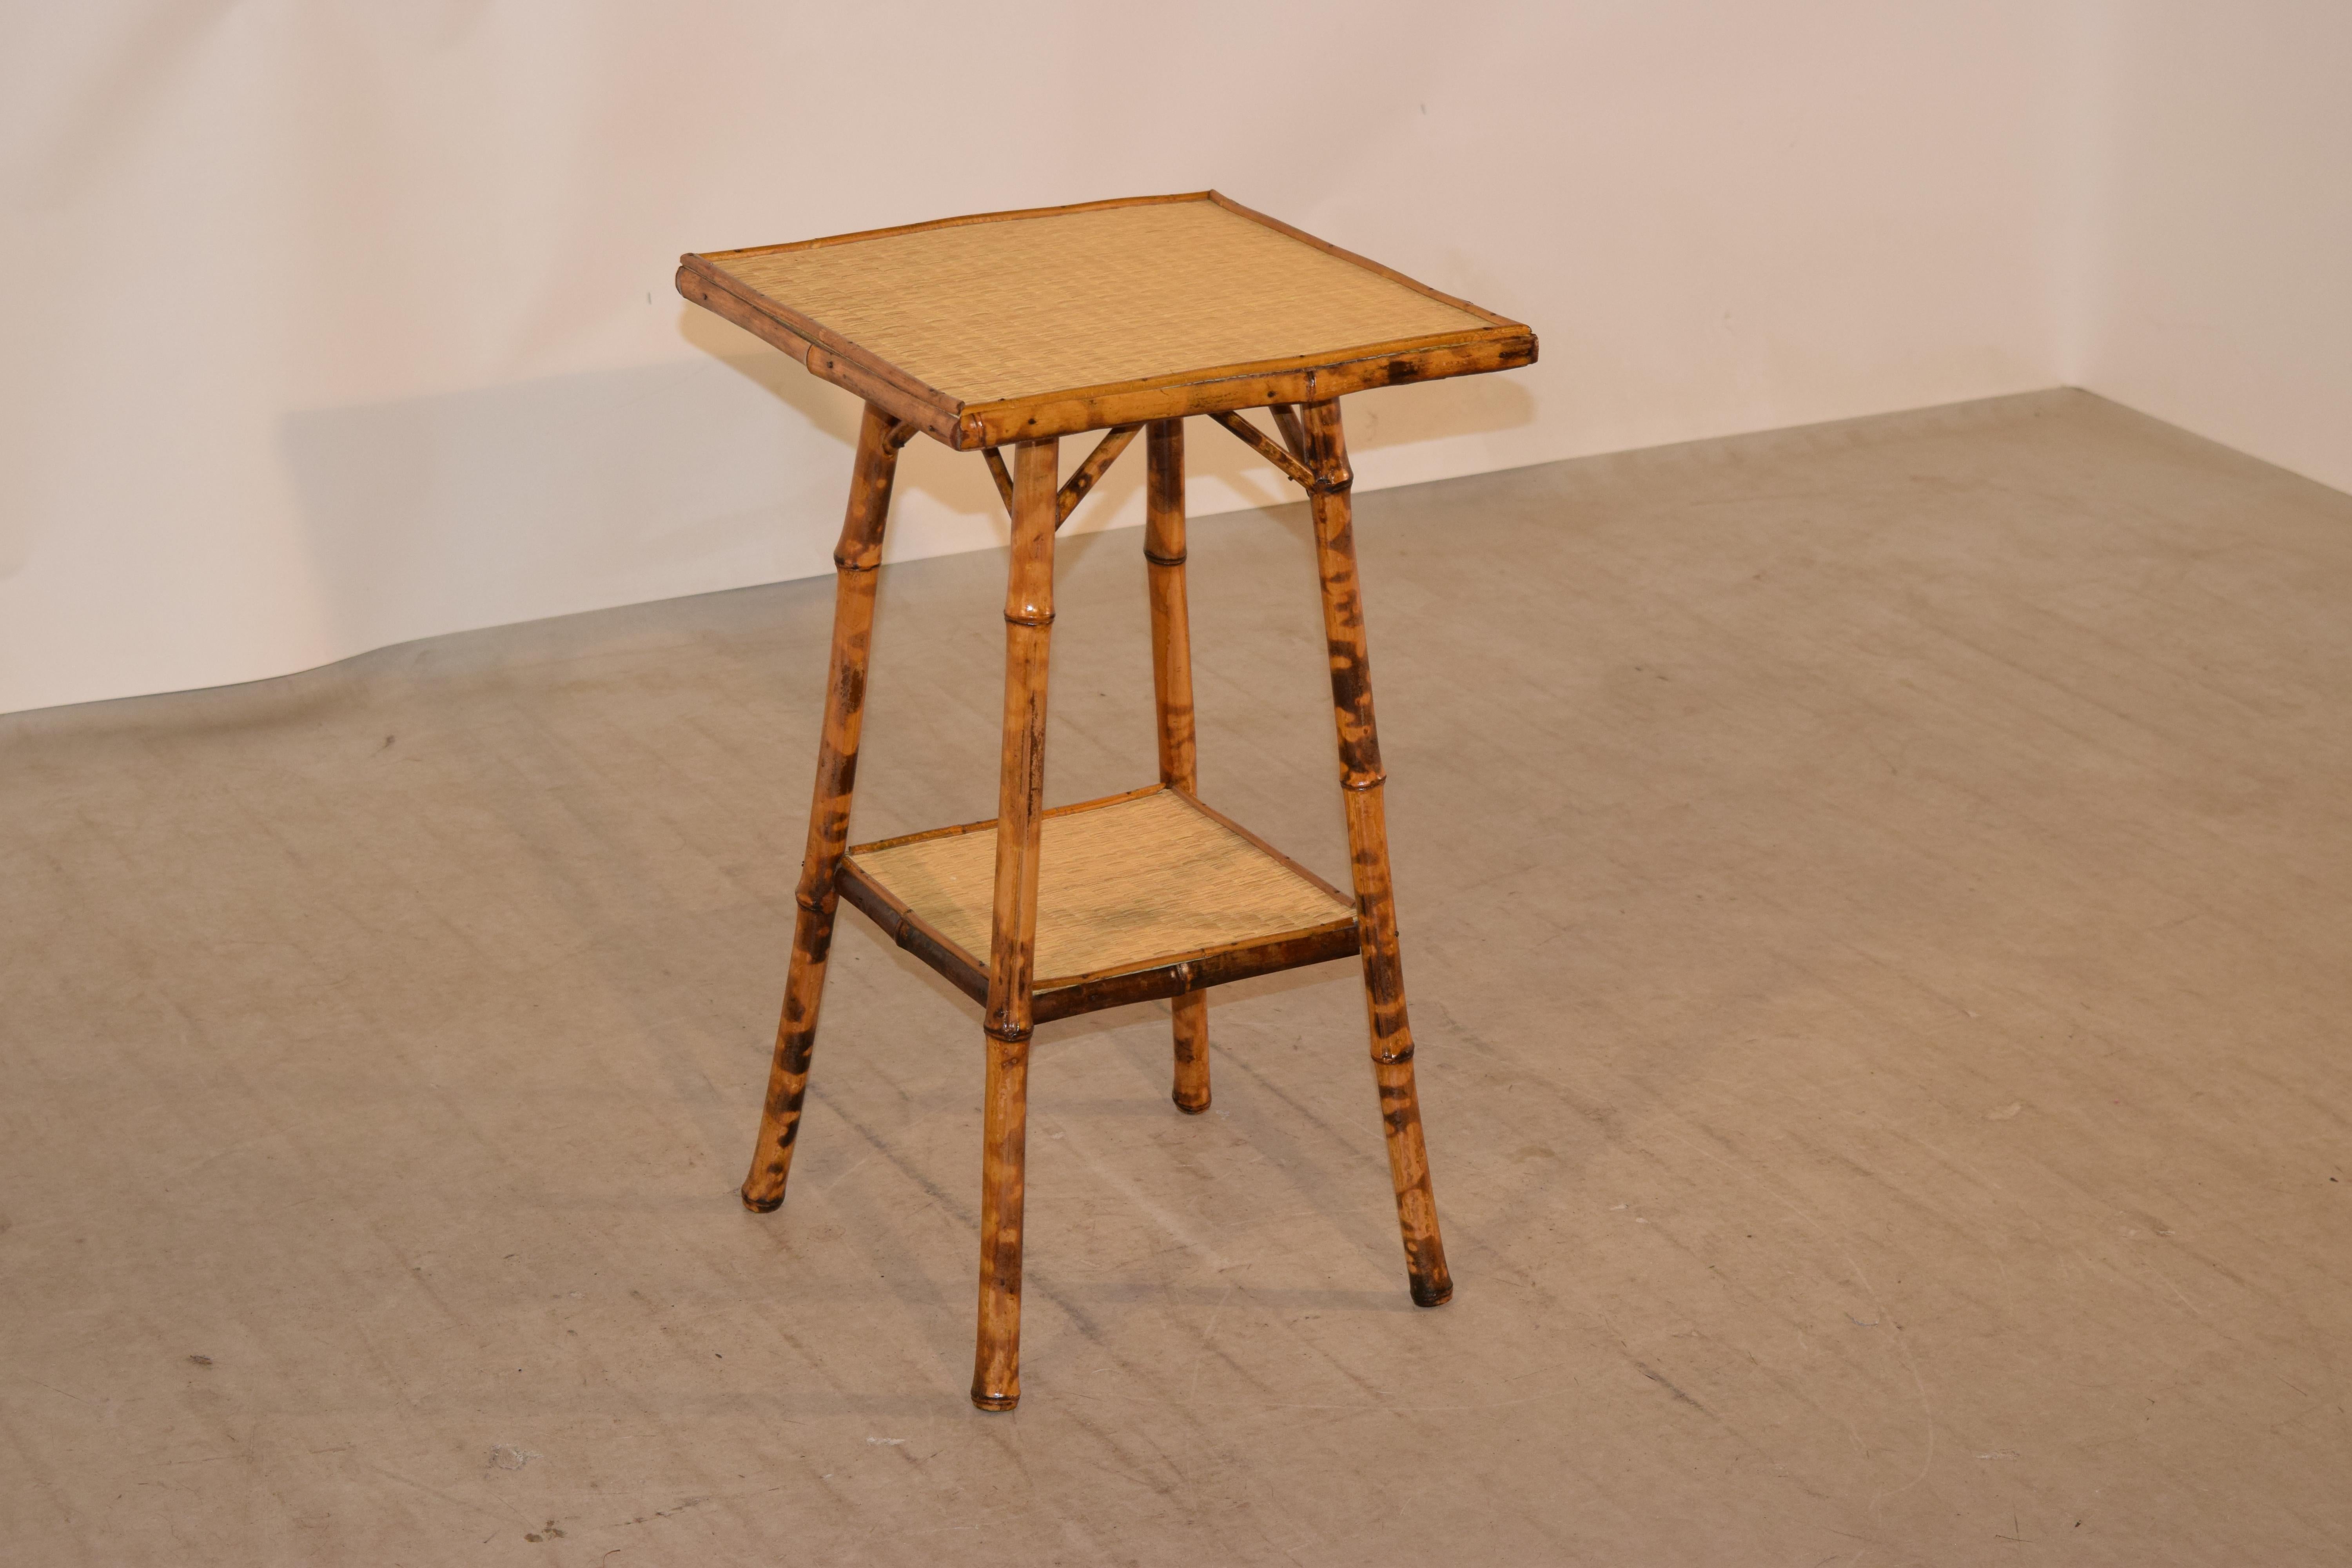 19th century tortoise bamboo side table from France with a rush covered top and lower shelf. The table has splayed legs.